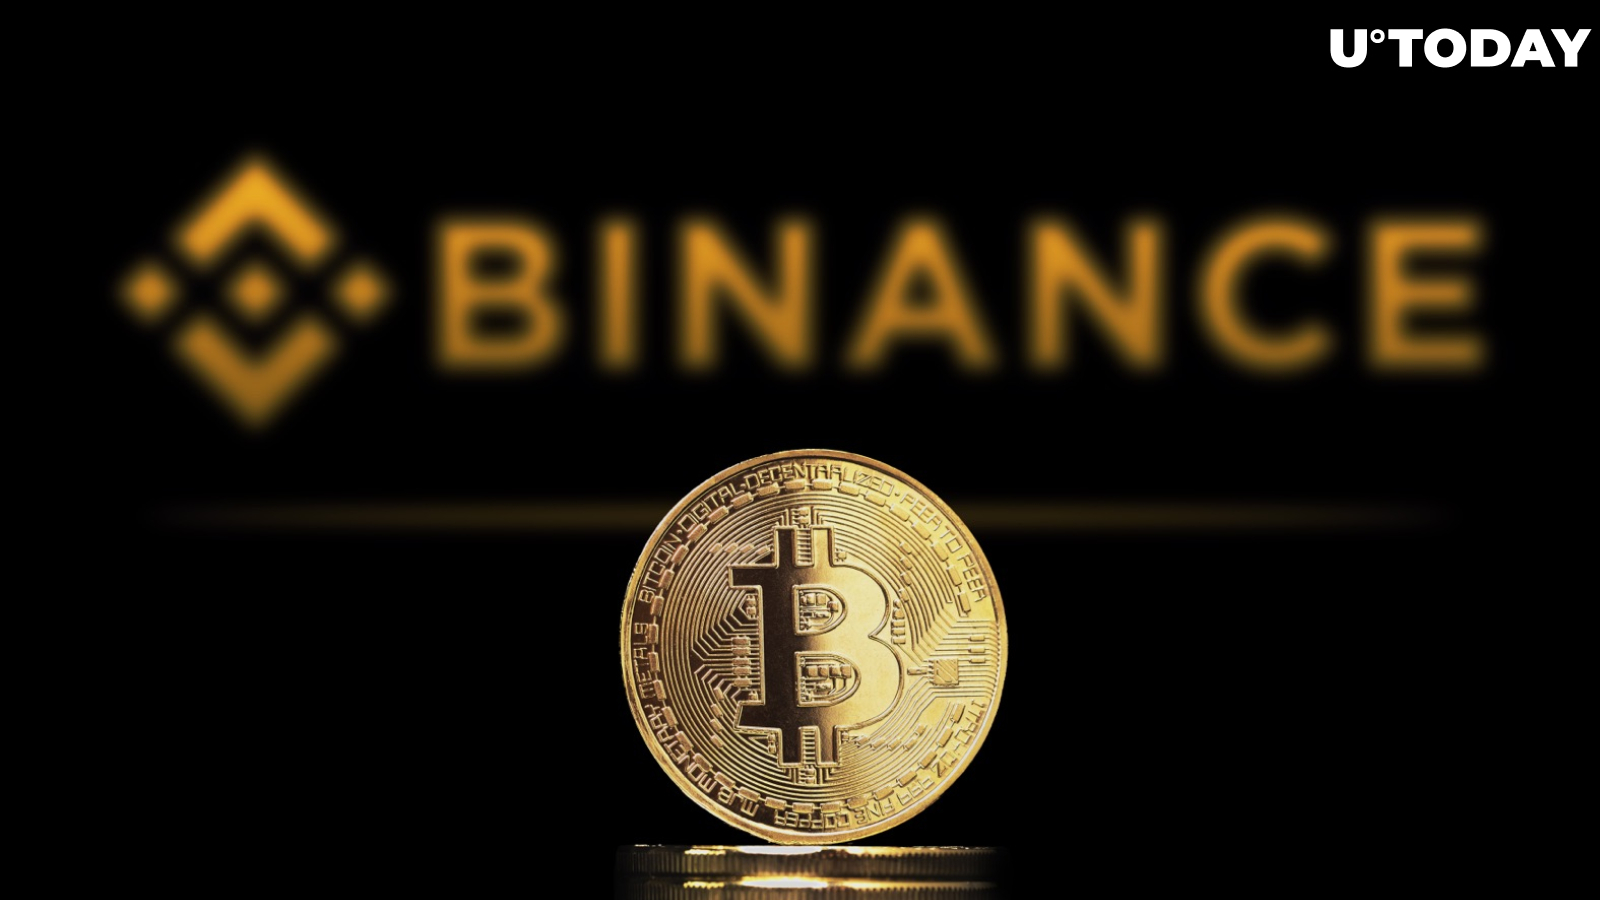 Binance’s BUSD Stablecoin Was Reportedly Targeted by Rival